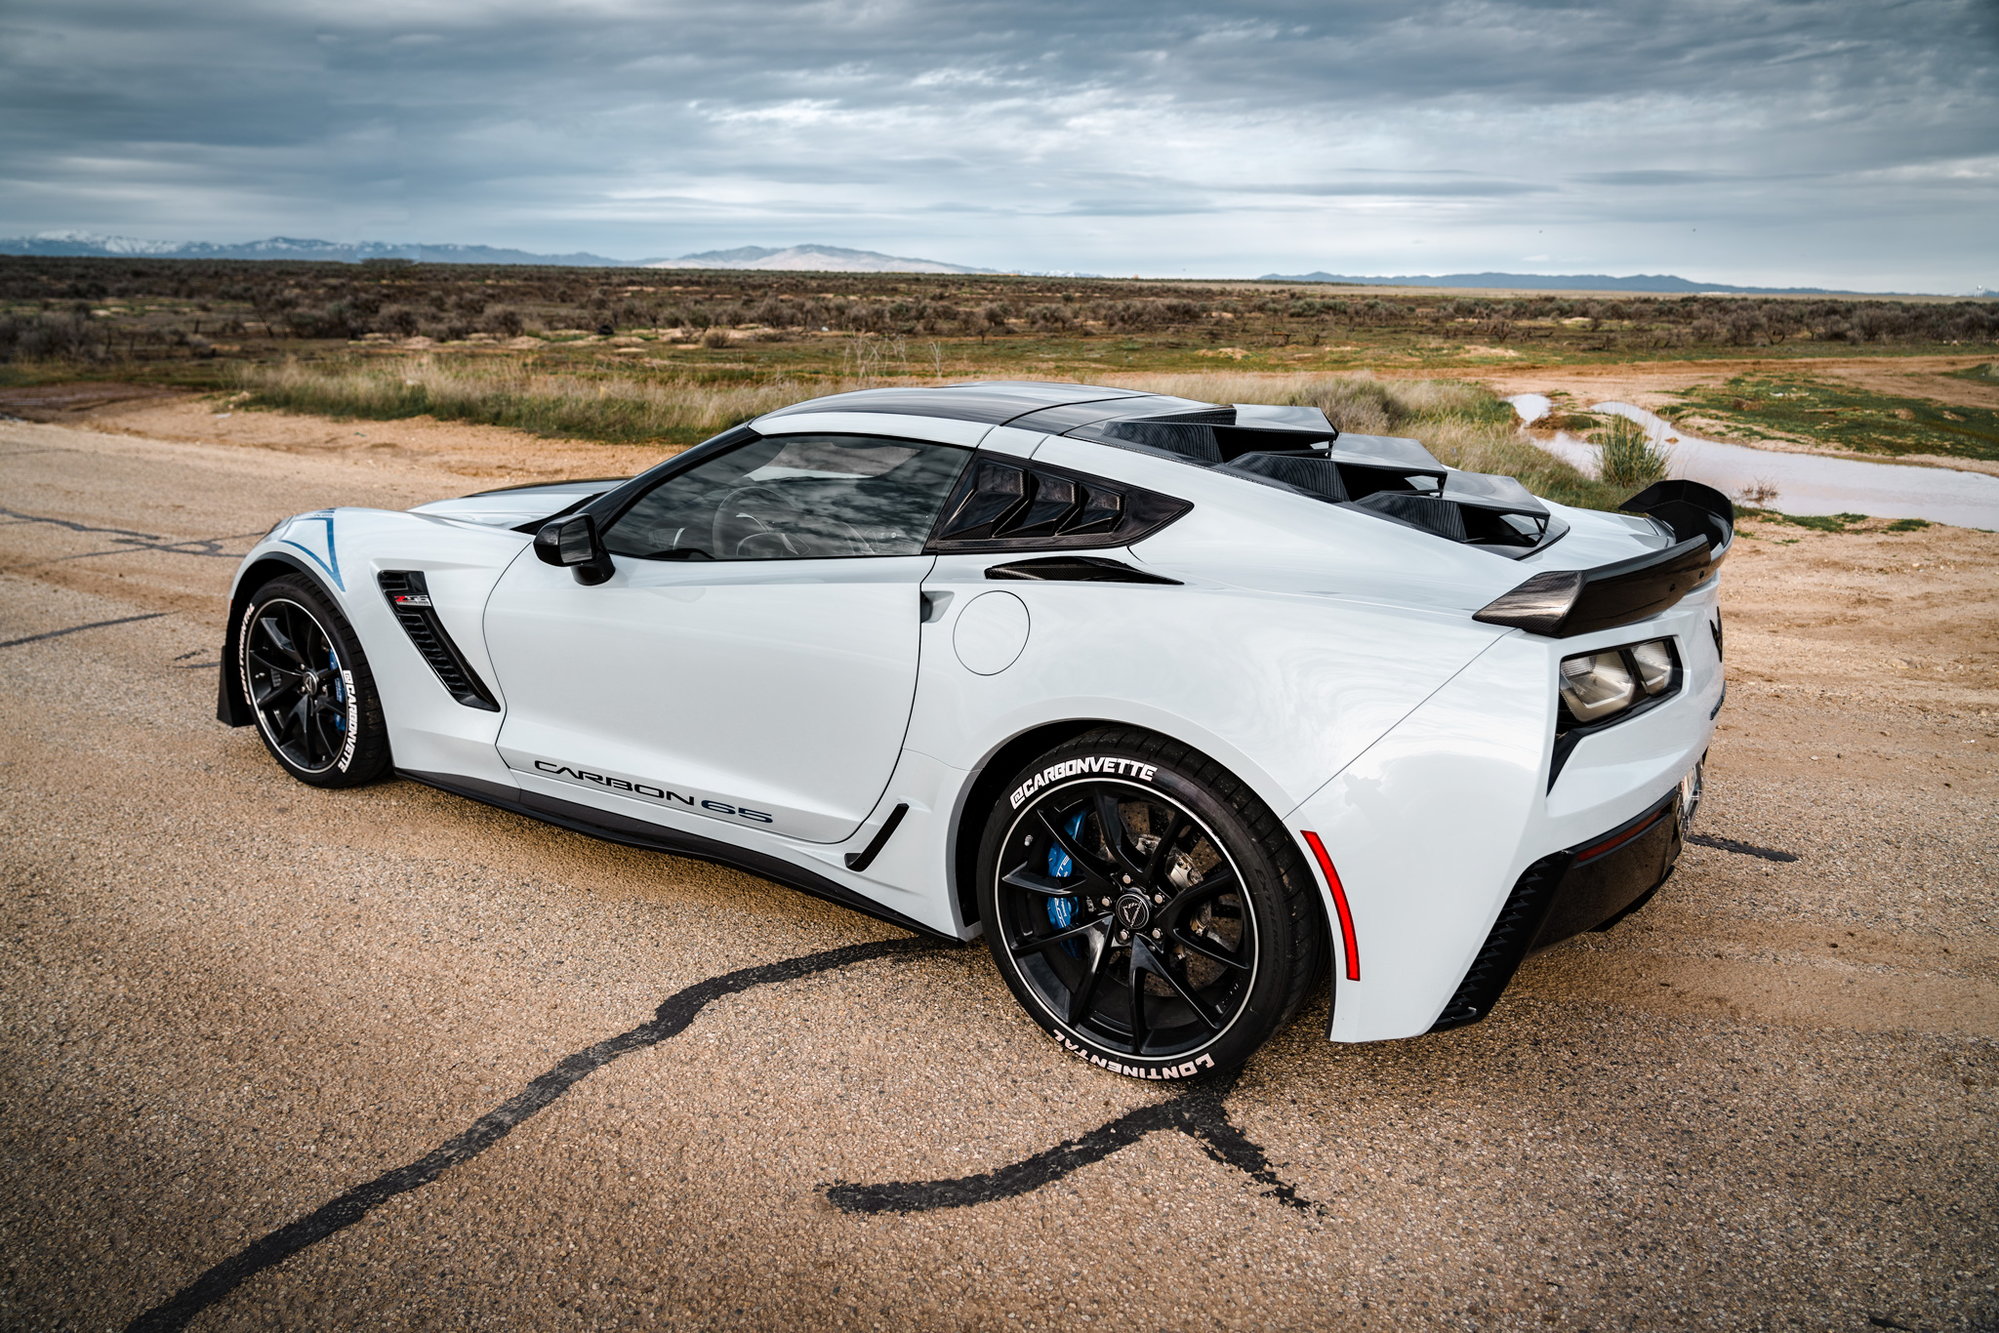 c7-of-the-year-appearance-modifications-corvetteforum-chevrolet